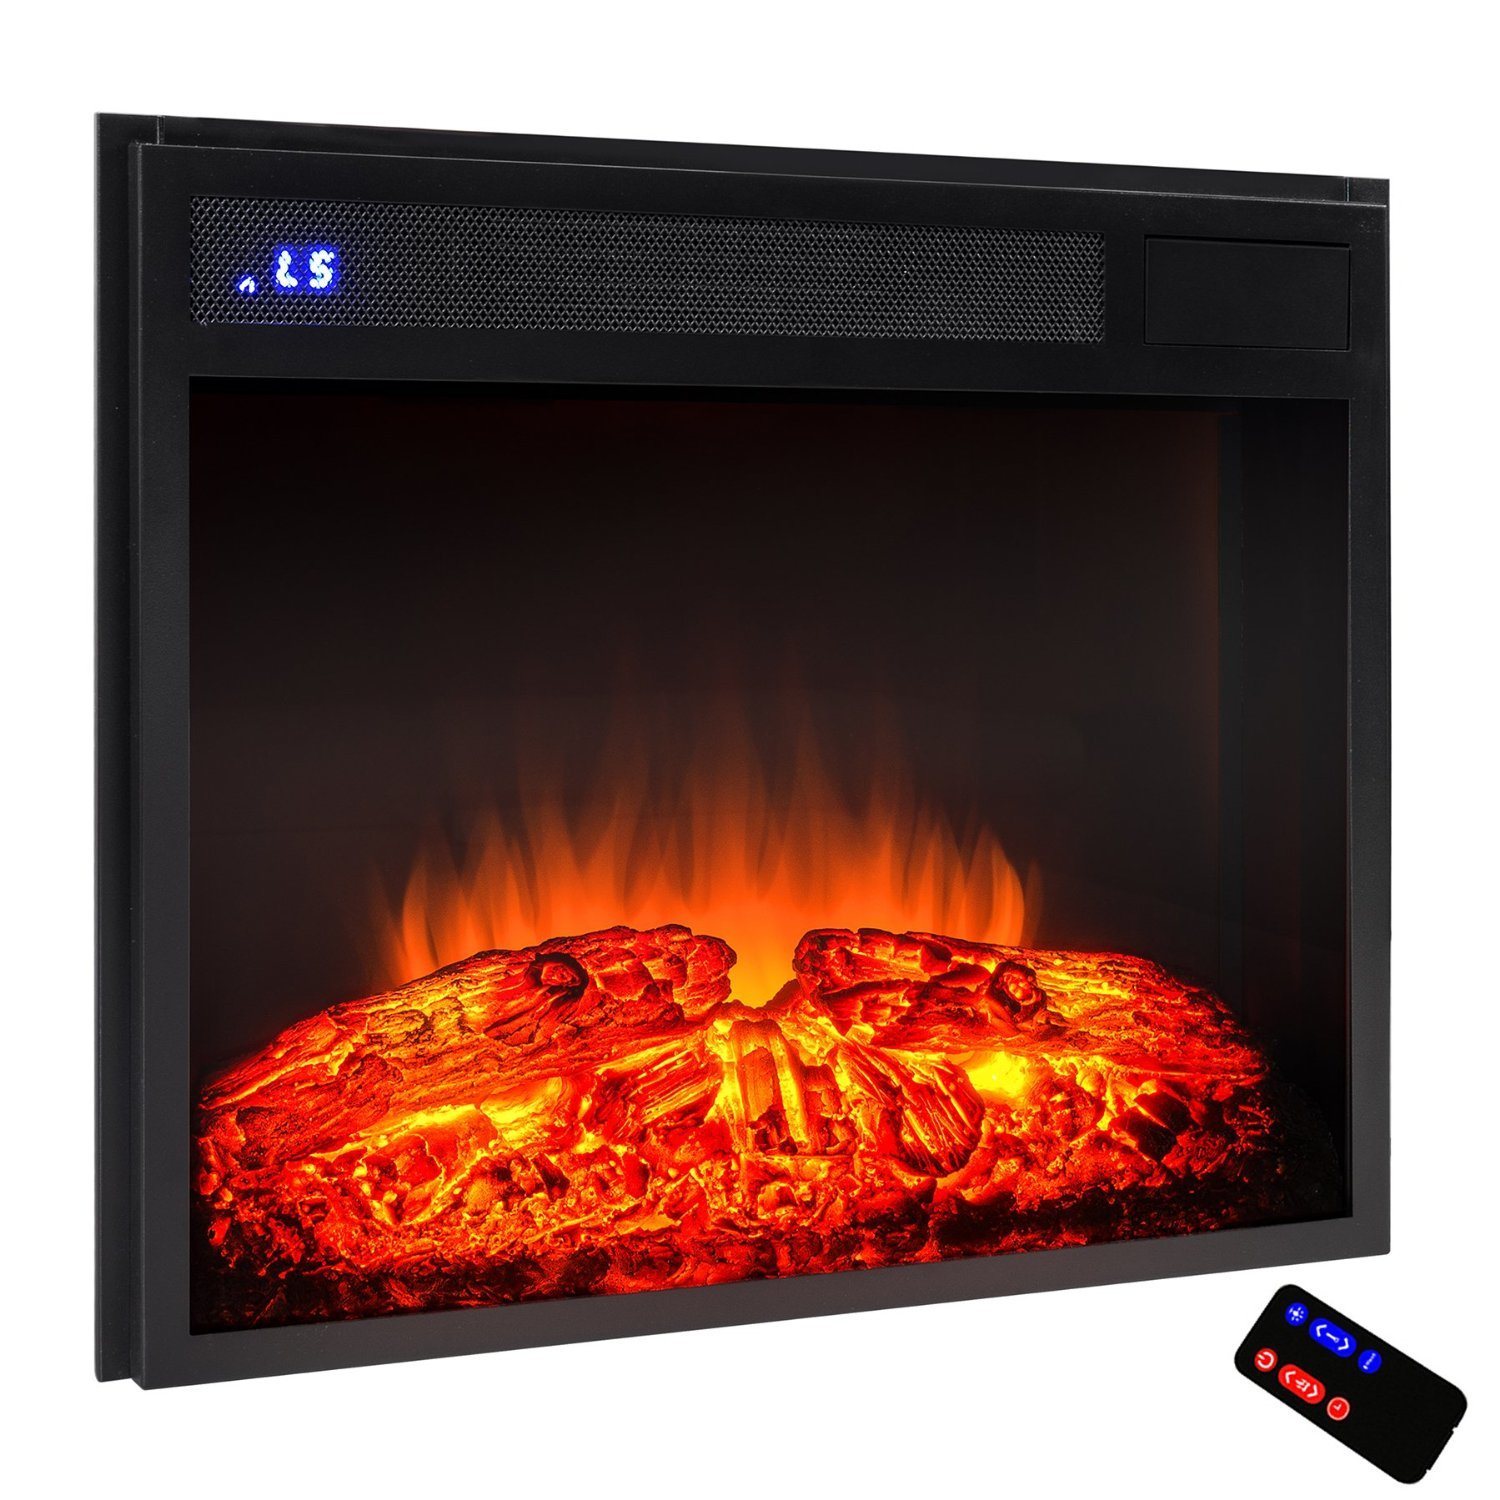 36 Gas Fireplace Insert Lovely Best Fireplace Inserts Reviews 2019 – Gas Wood Electric